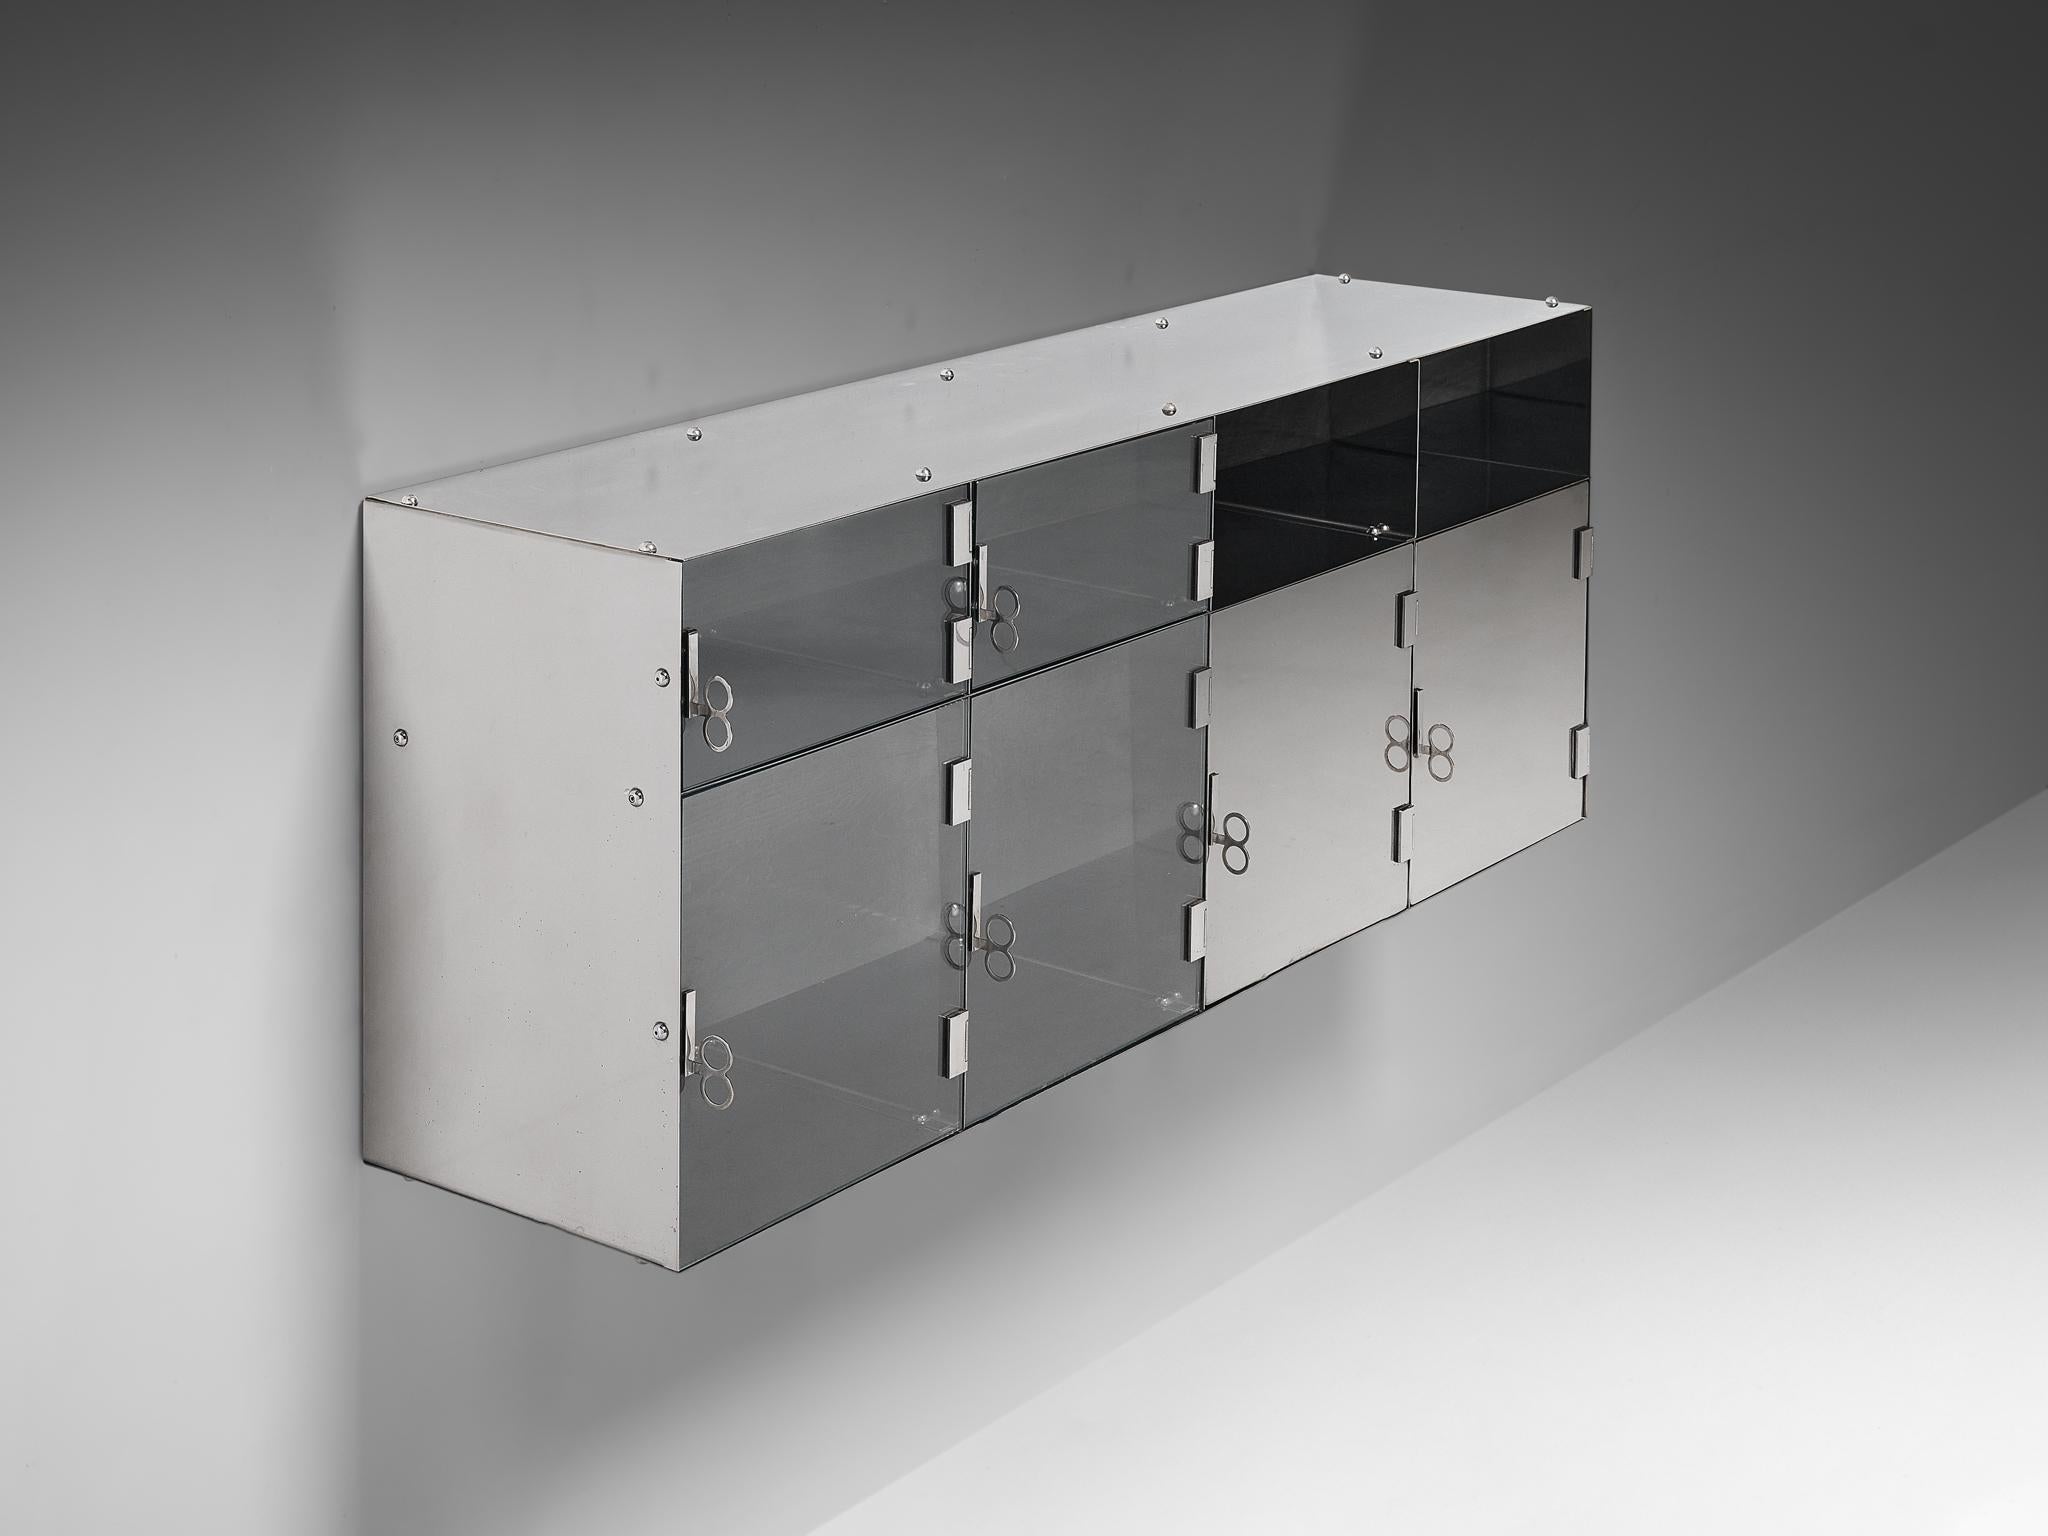 Vittorio Introini for Saporiti, wall-mounted sideboard, polished aluminum, glass, lacquered ash, Italy, 1960s 

Exceptional cabinet designed by Vittorio Introini for Saporiti in the 1960s. The rationalist aluminum and glass sideboard has a clear and